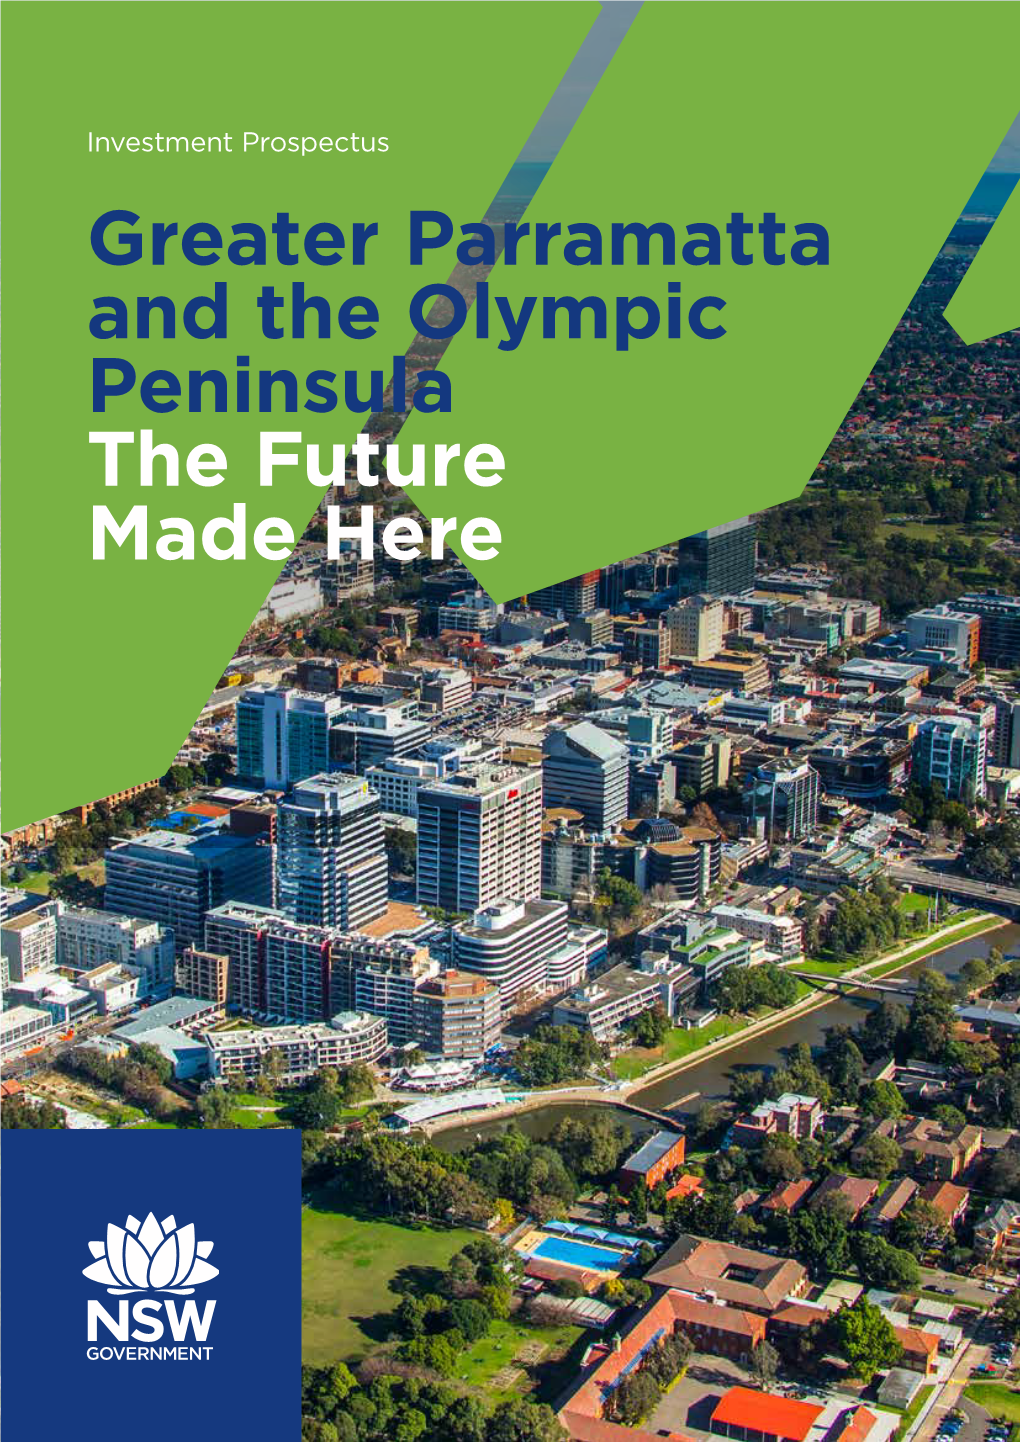 Greater Parramatta and the Olympic Peninsula the Future Made Here Invest in GPOP - the Connected, Unifying Heart of Greater Sydney